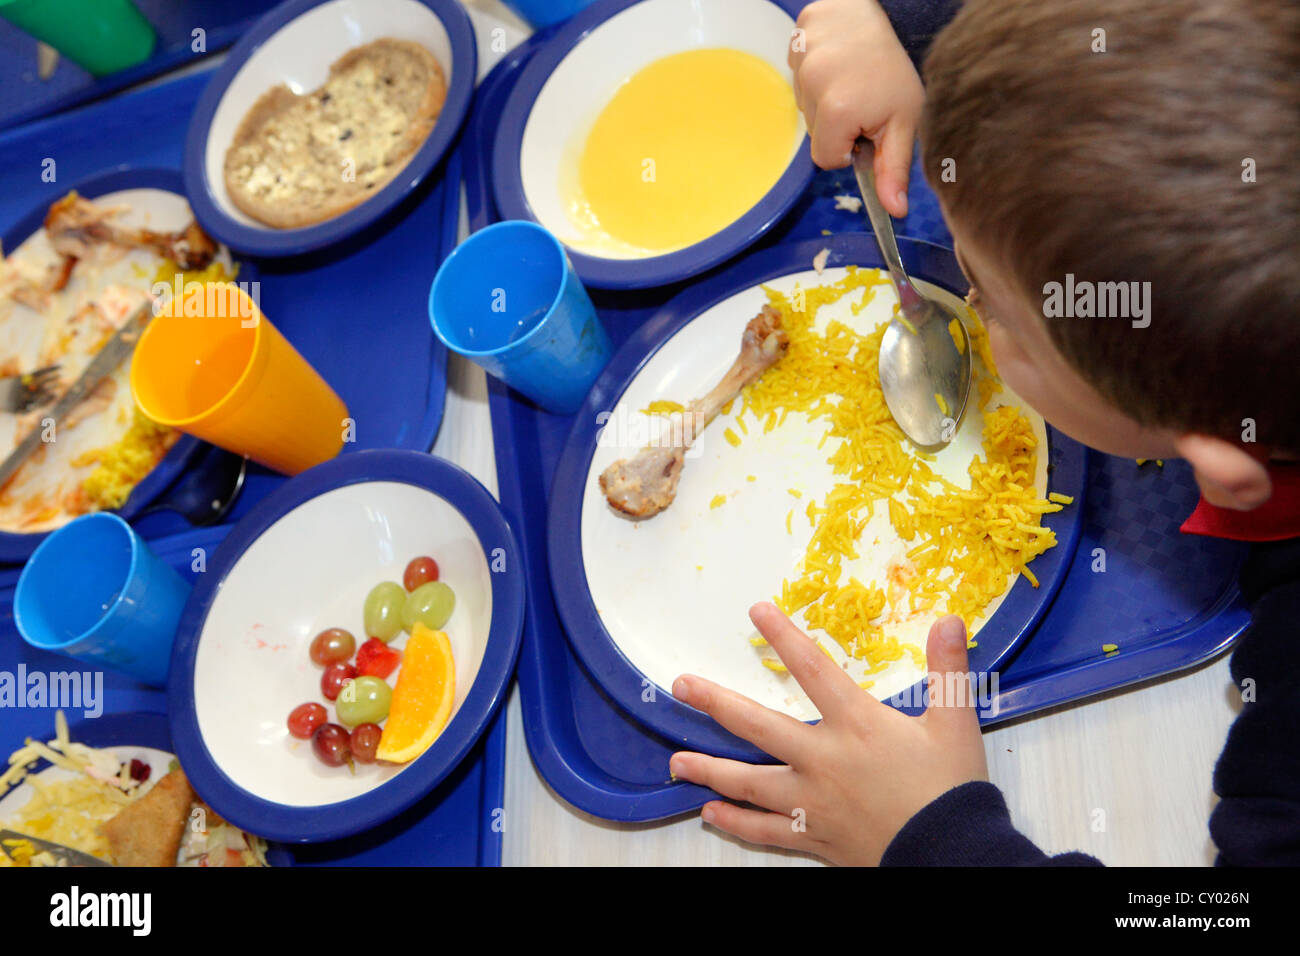 Boy (cannot be recognized) eating healthy school lunch of rice and chicken, London Primary School. Free school meals Stock Photo